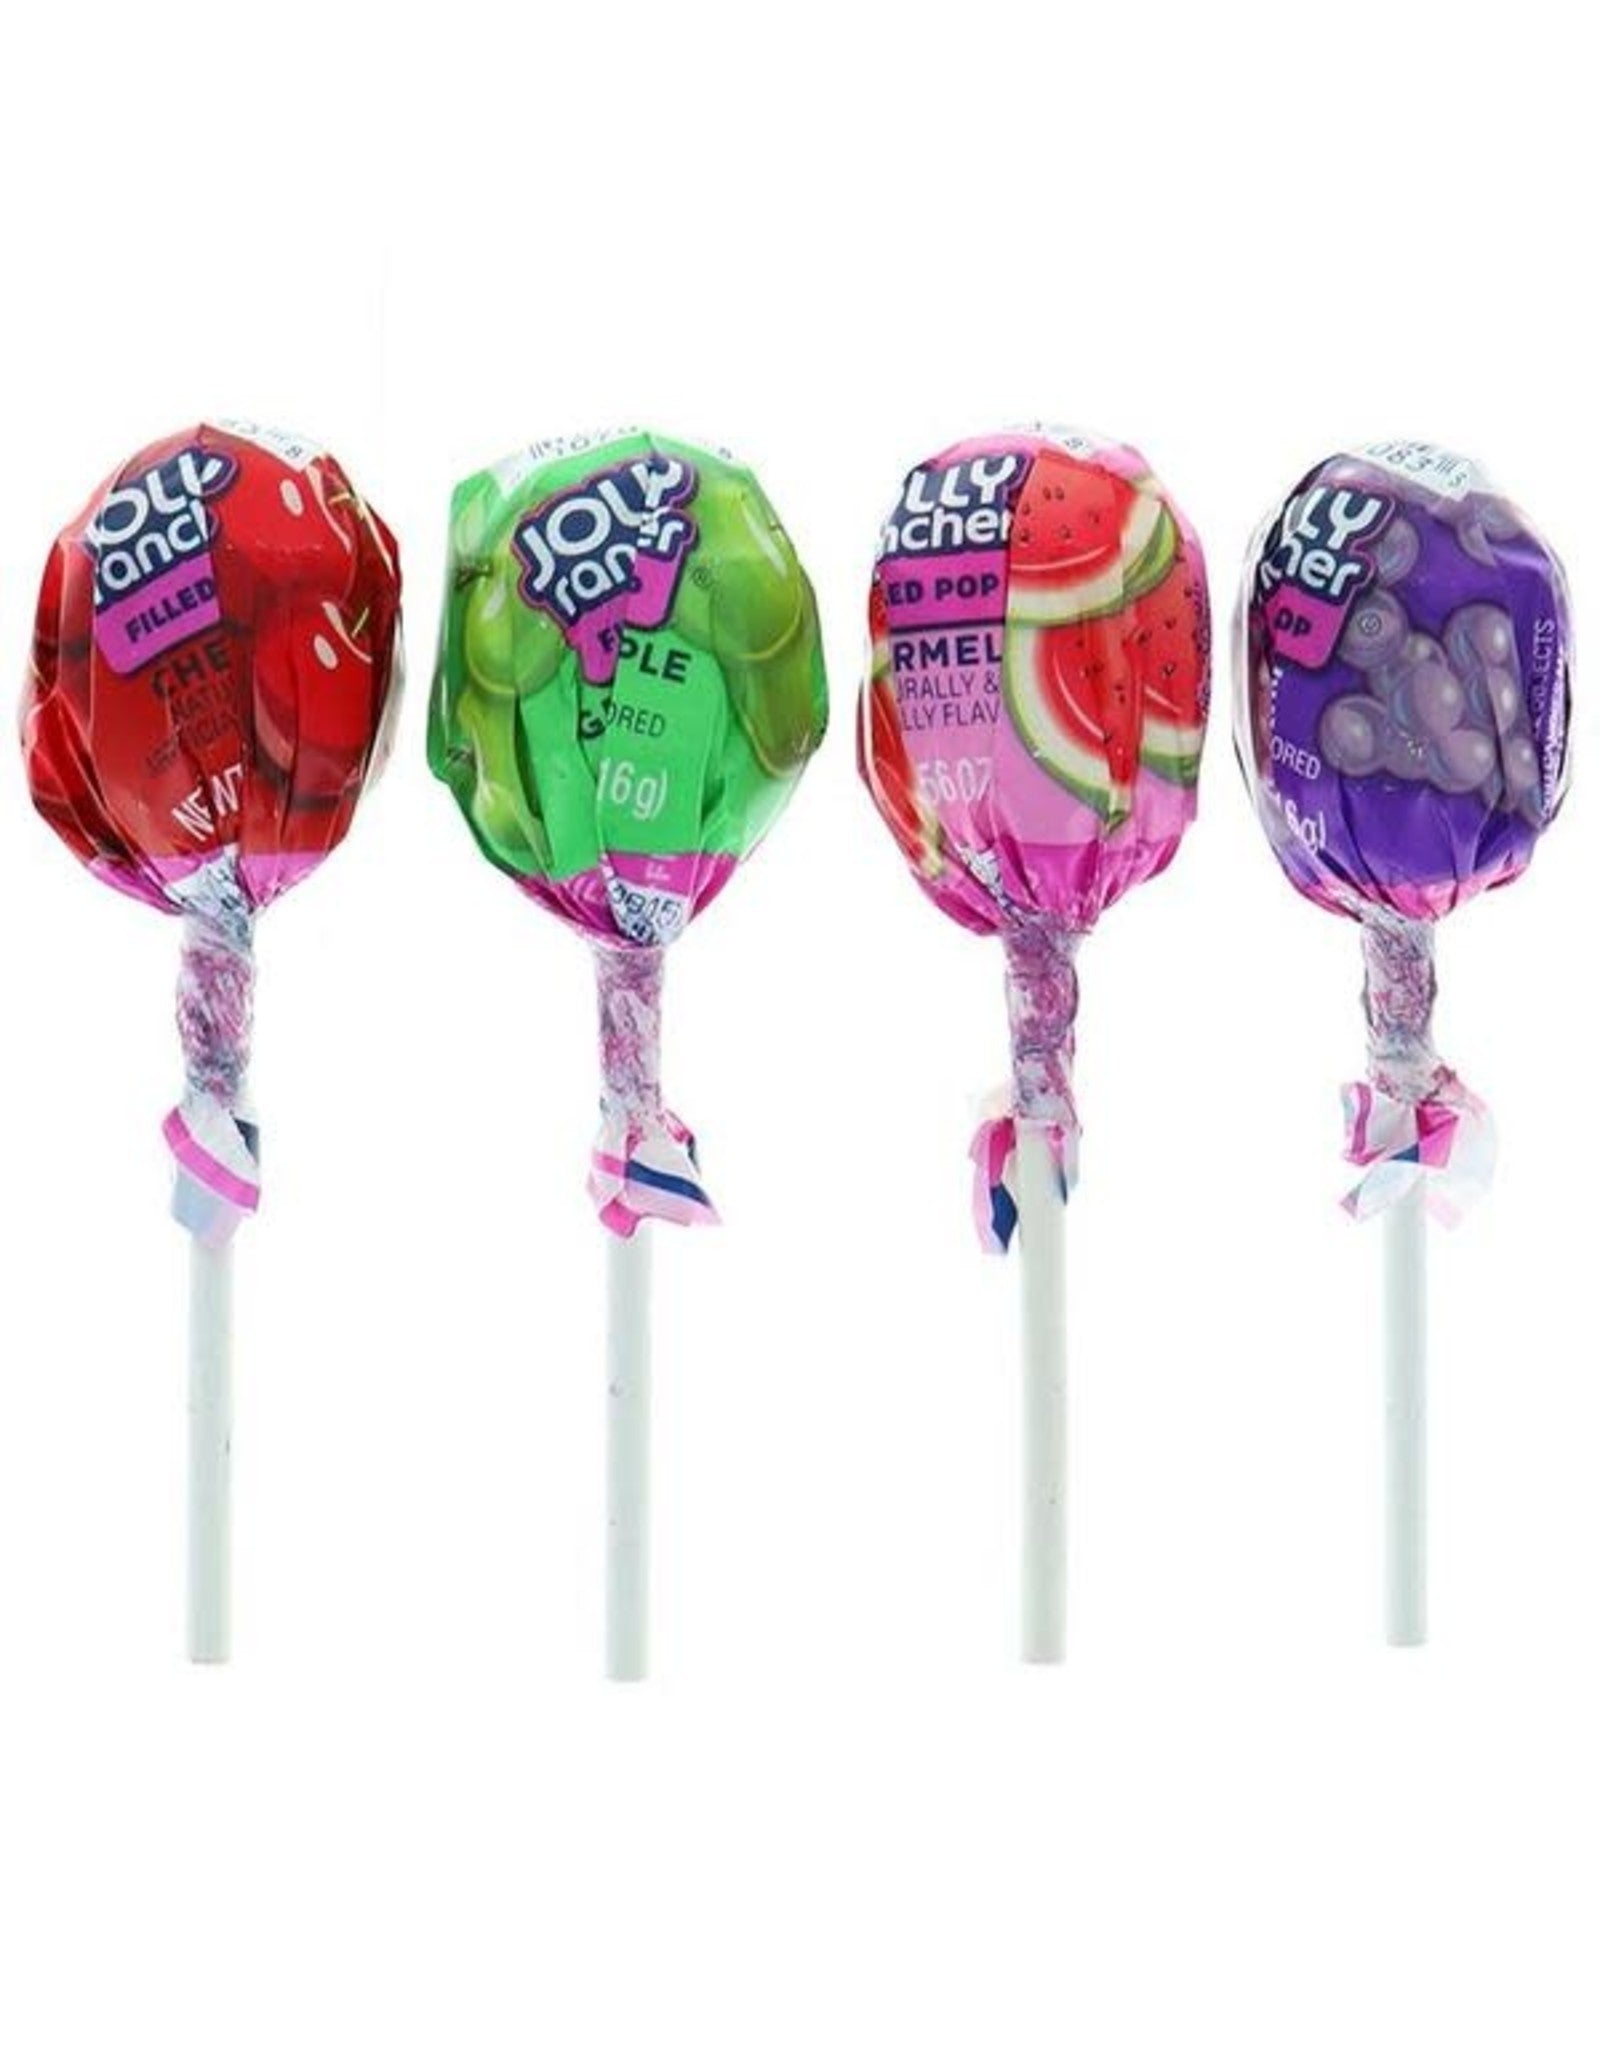 Jolly Rancher Chewy Filled Lollipops 15.8 g Snaxies Exotic Lollipops Montreal Canada